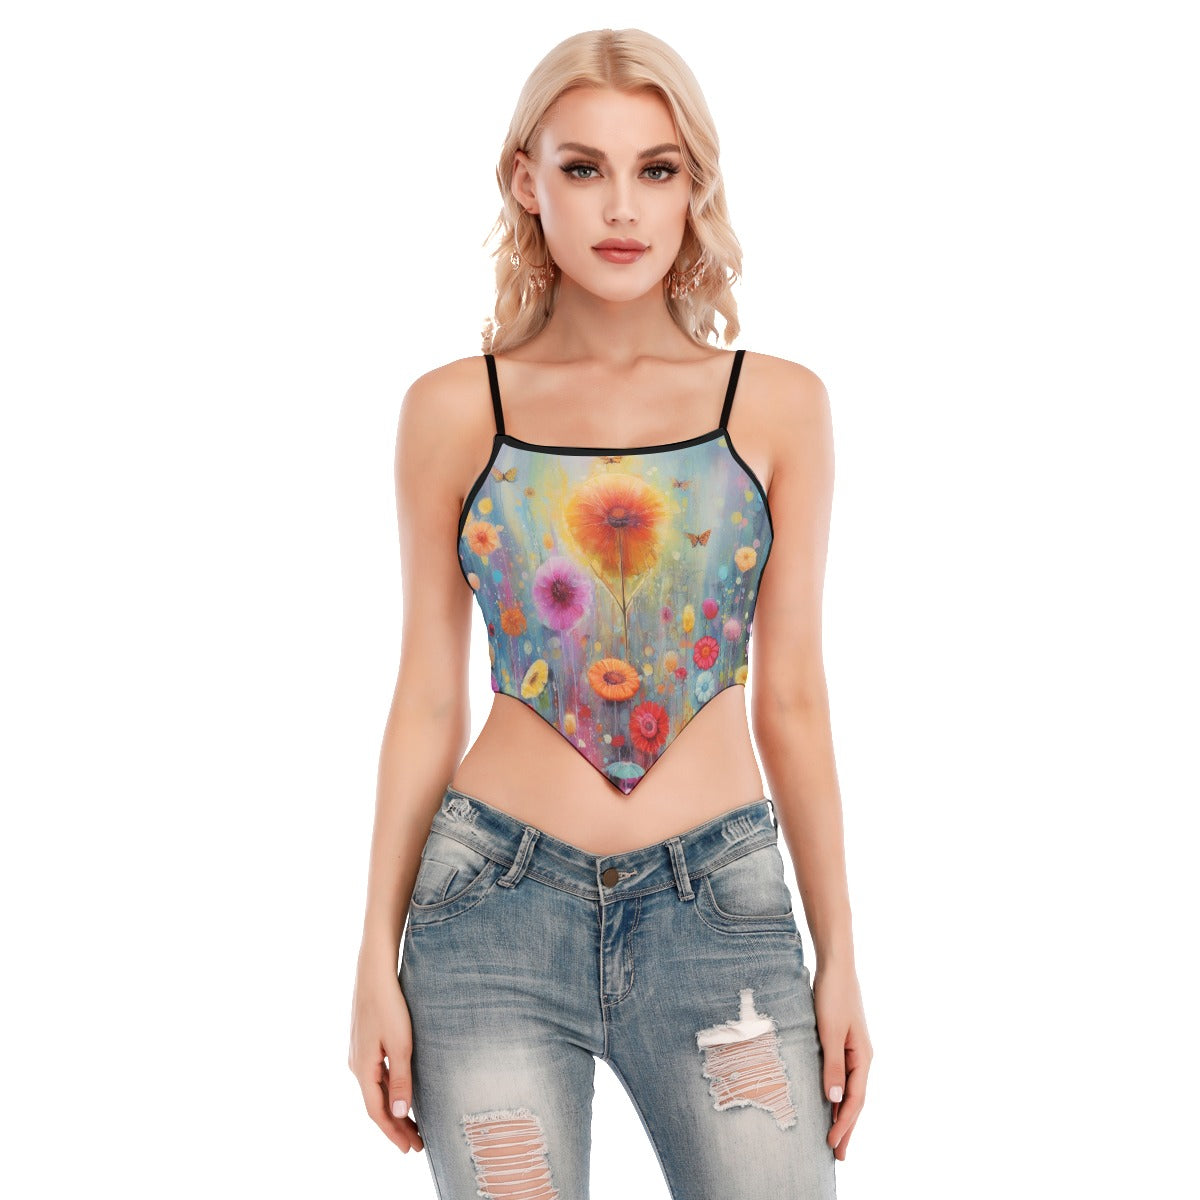 All-Over Print Women's Cami Tube Top